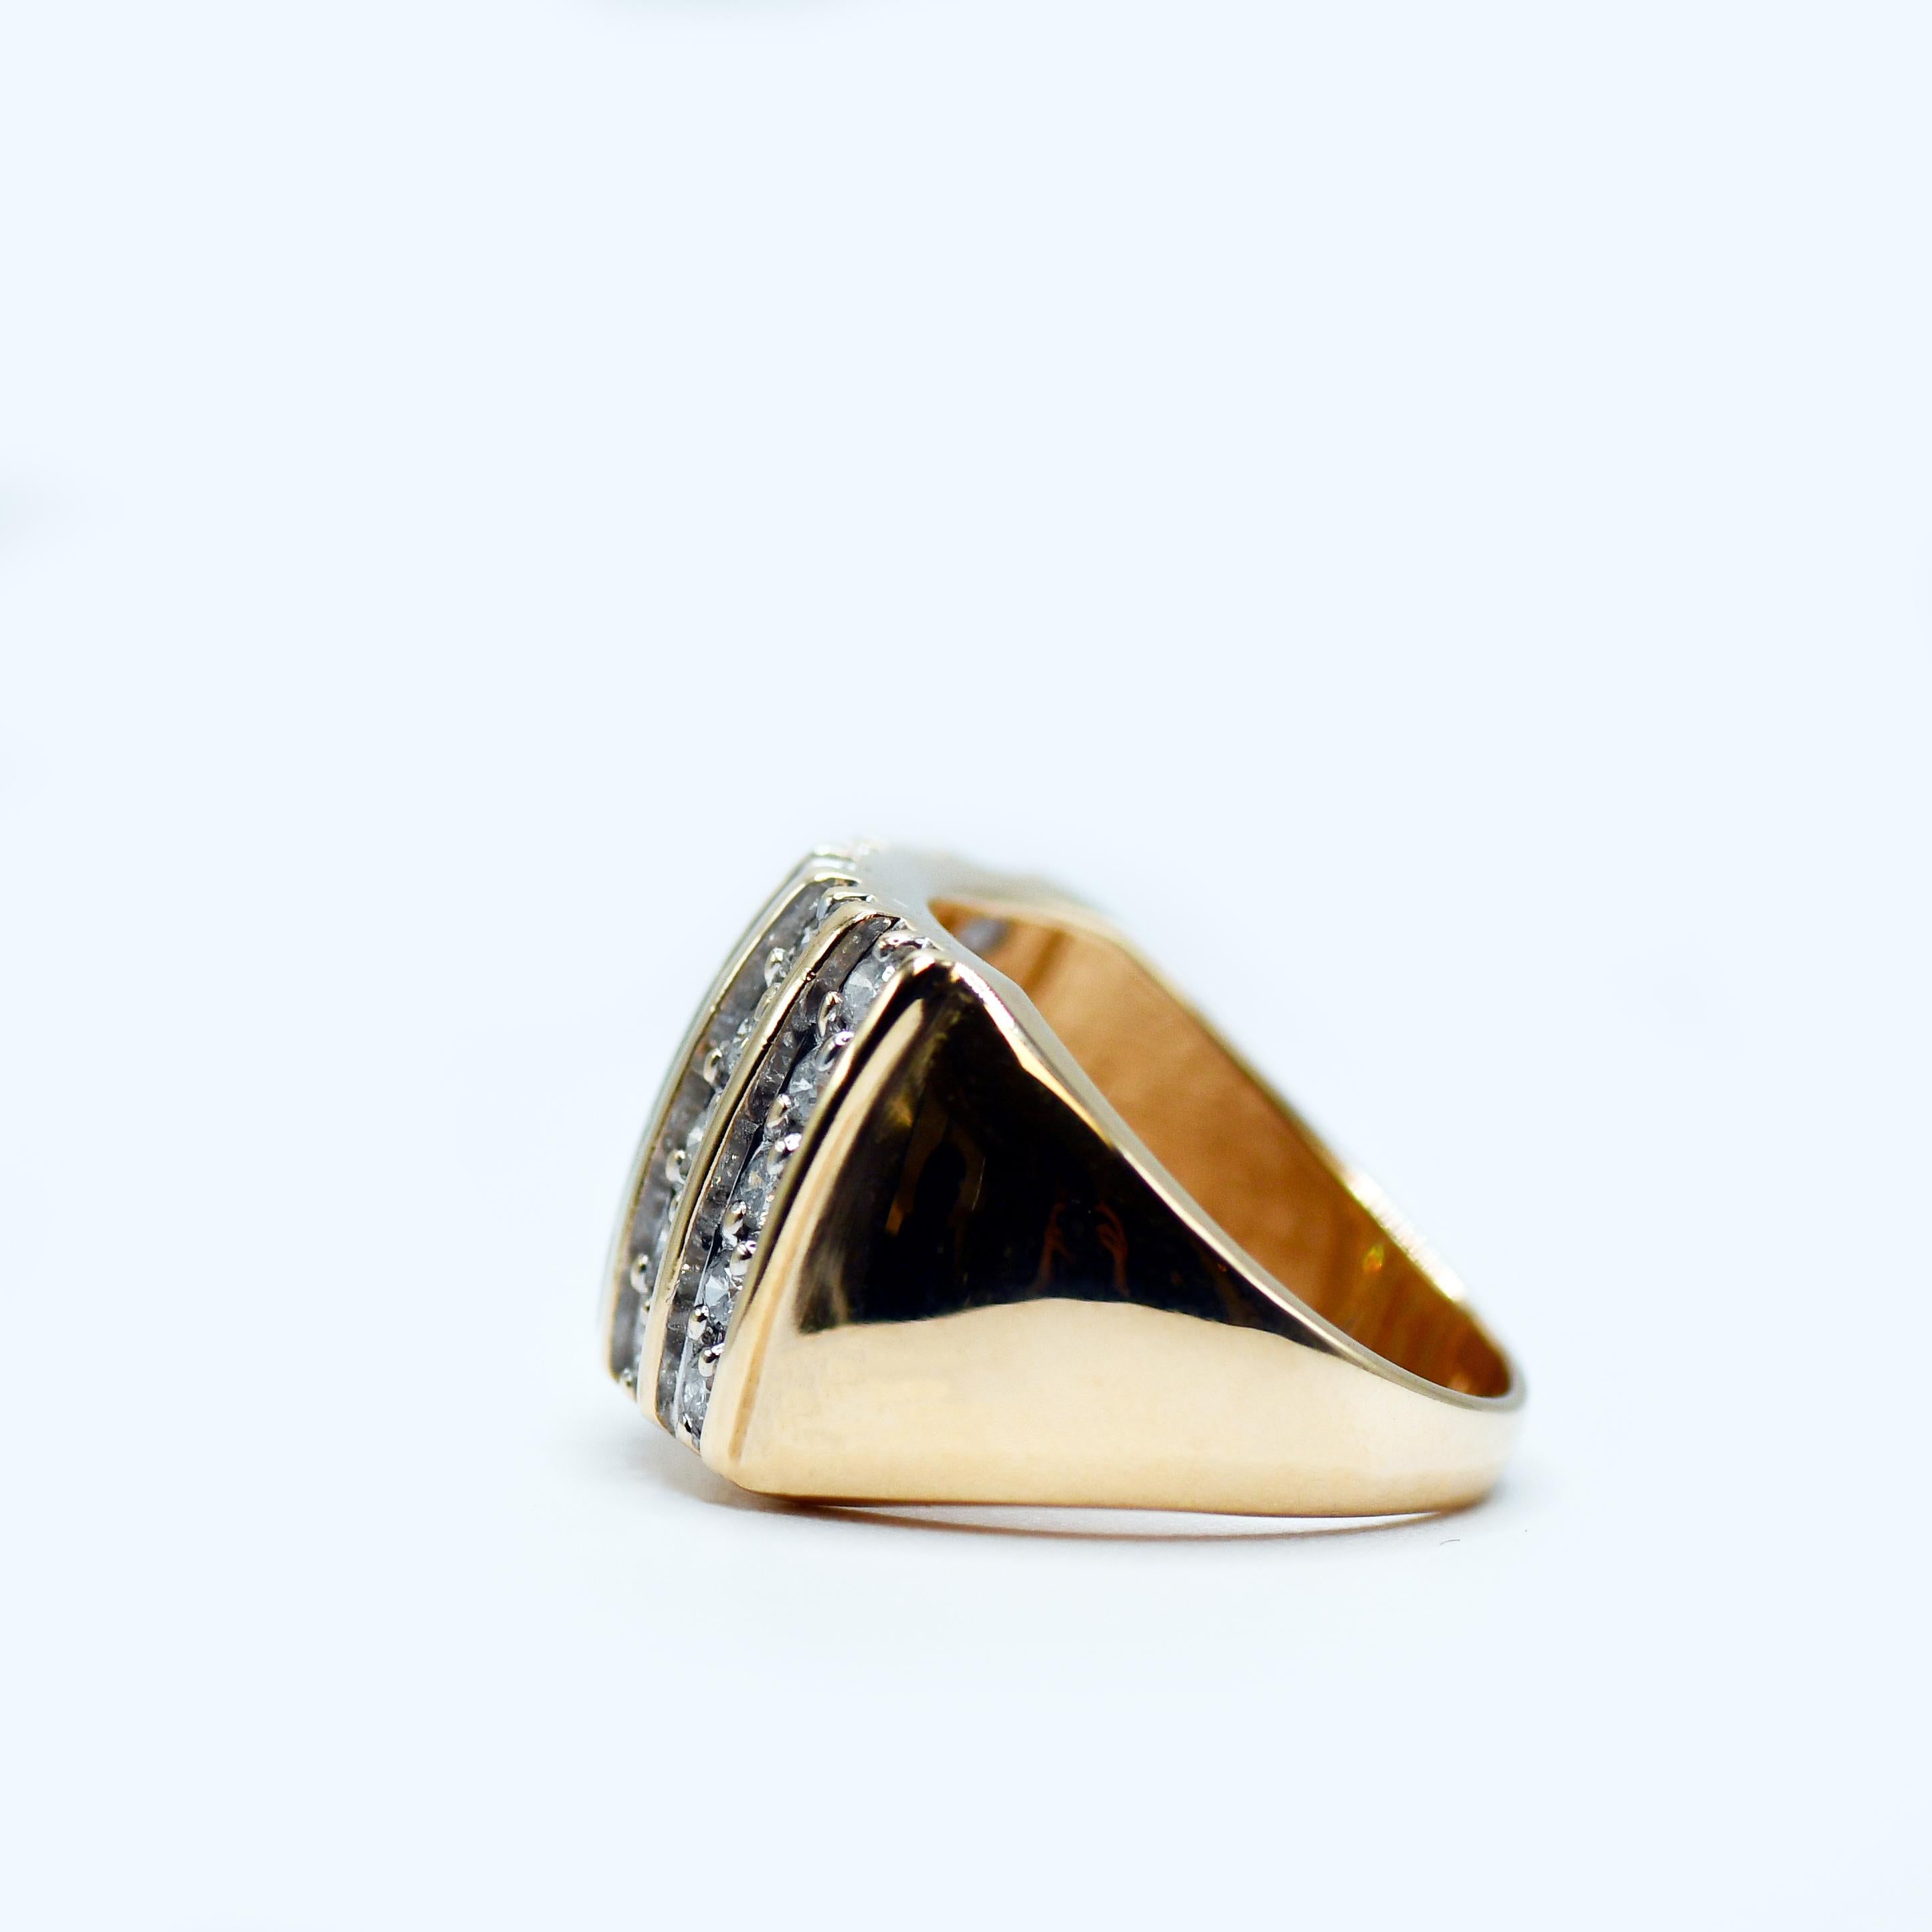 14K Yellow Gold Diamond Cocktail Ring, 1.00TDW, 8.6g For Sale 3